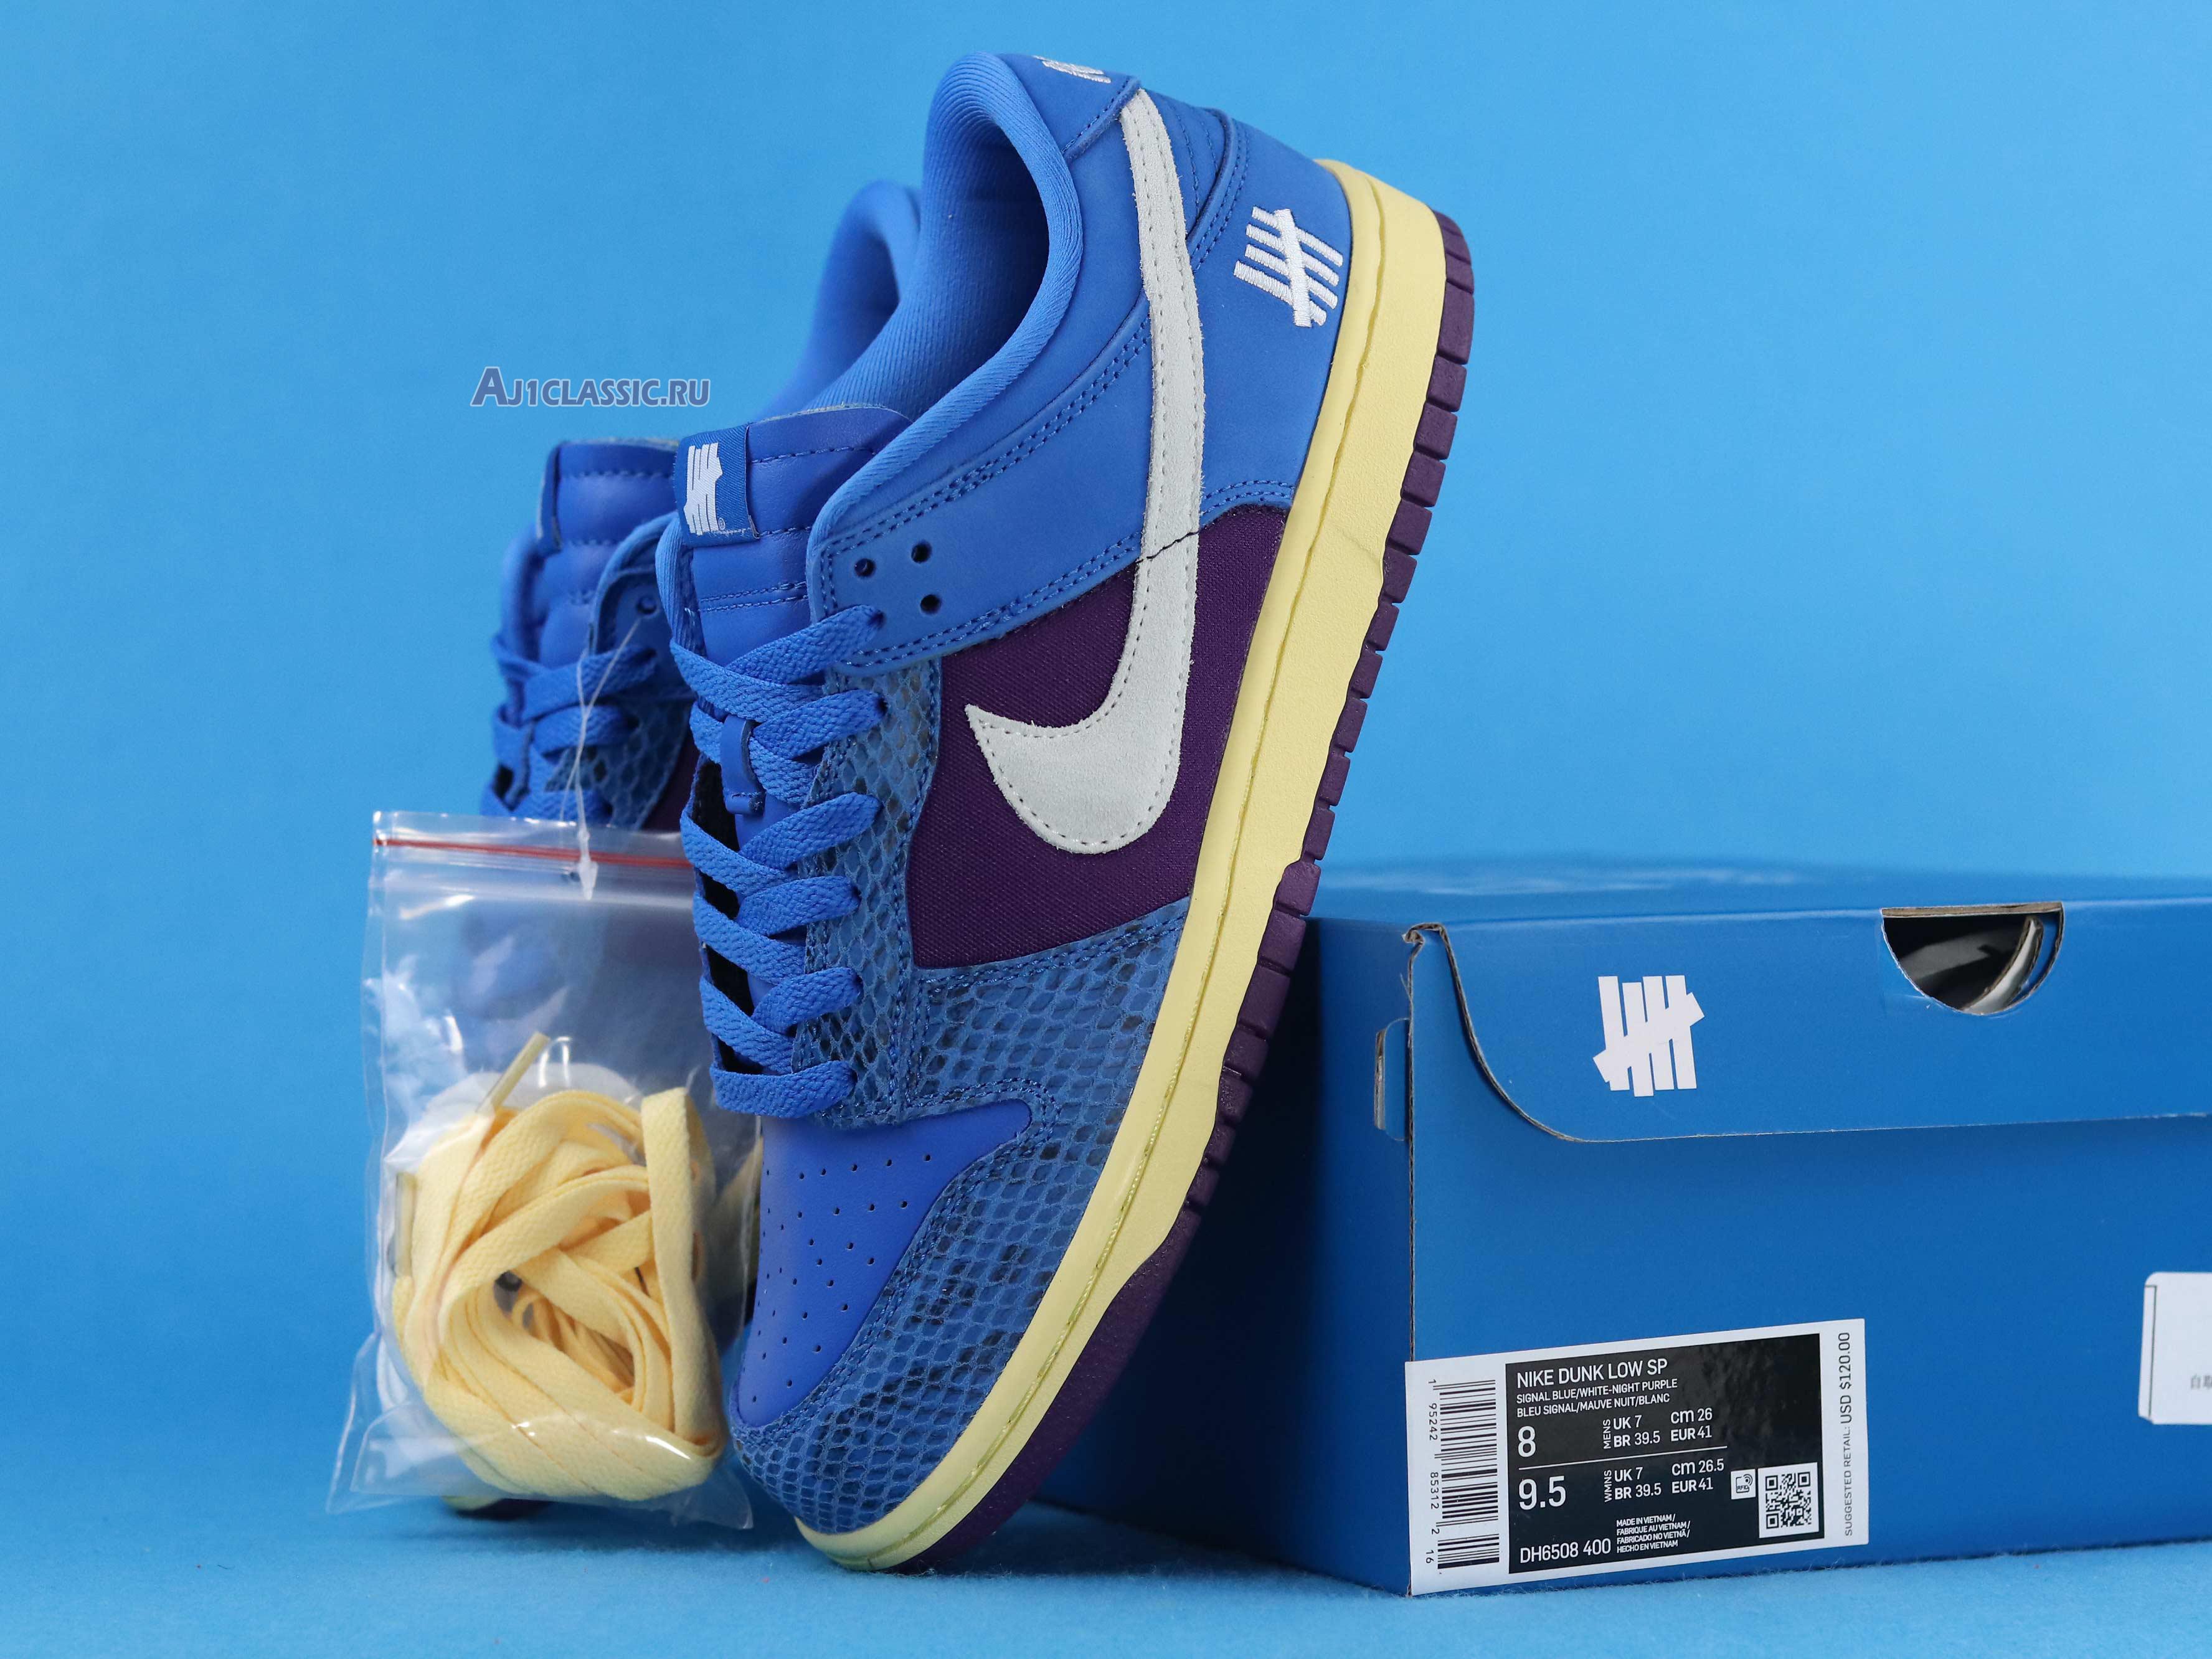 Undefeated x Nike Dunk Low SP "Dunk vs AF1" DH6508-400